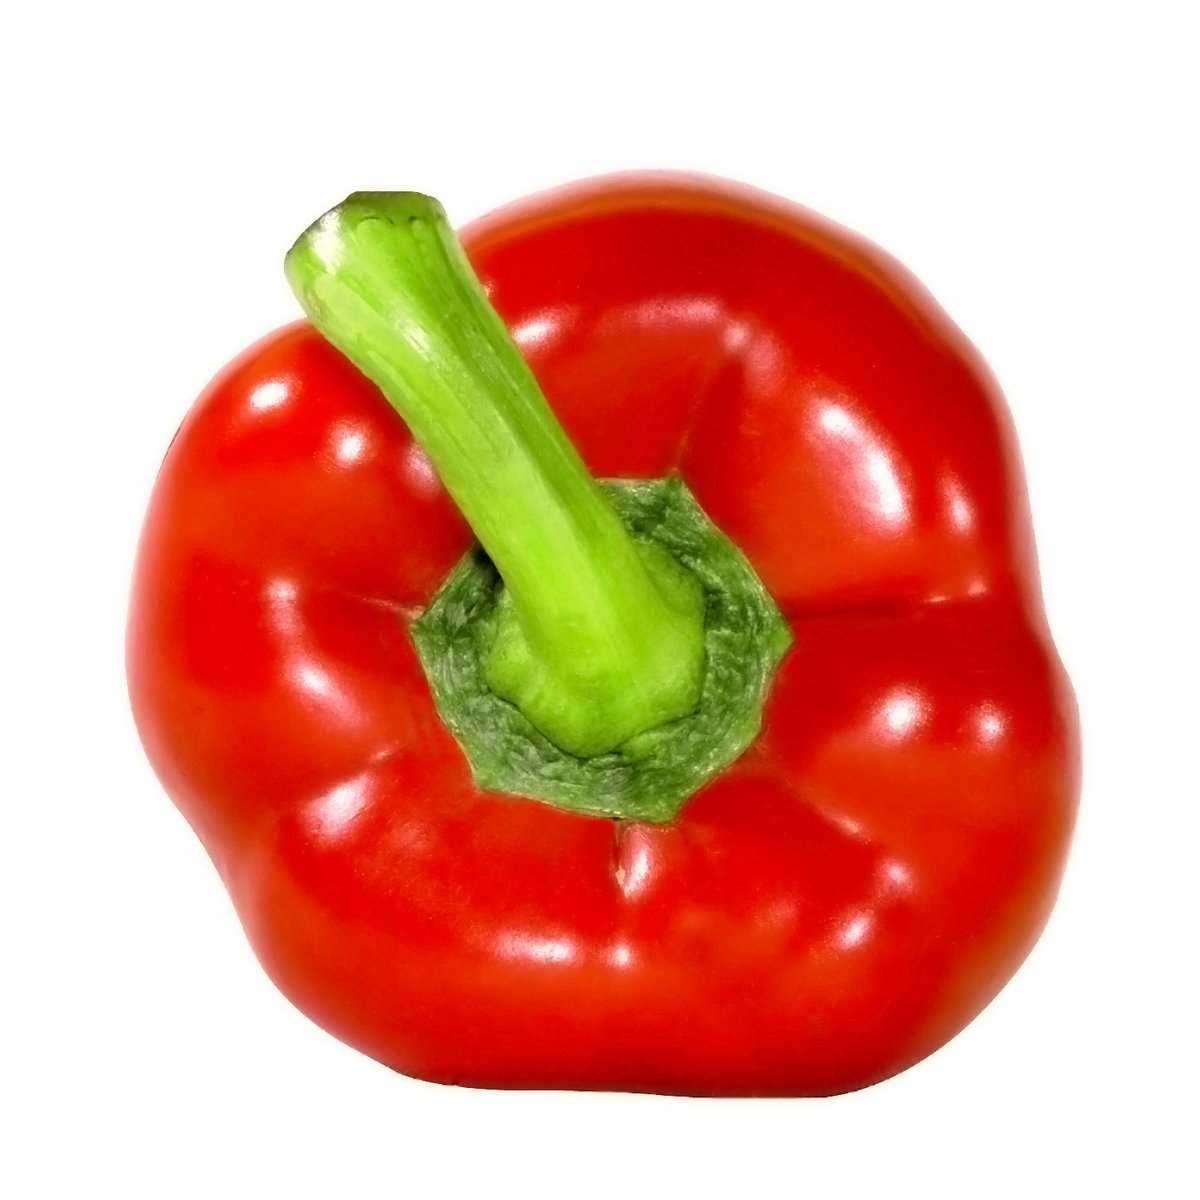 a close up view of a red pepper